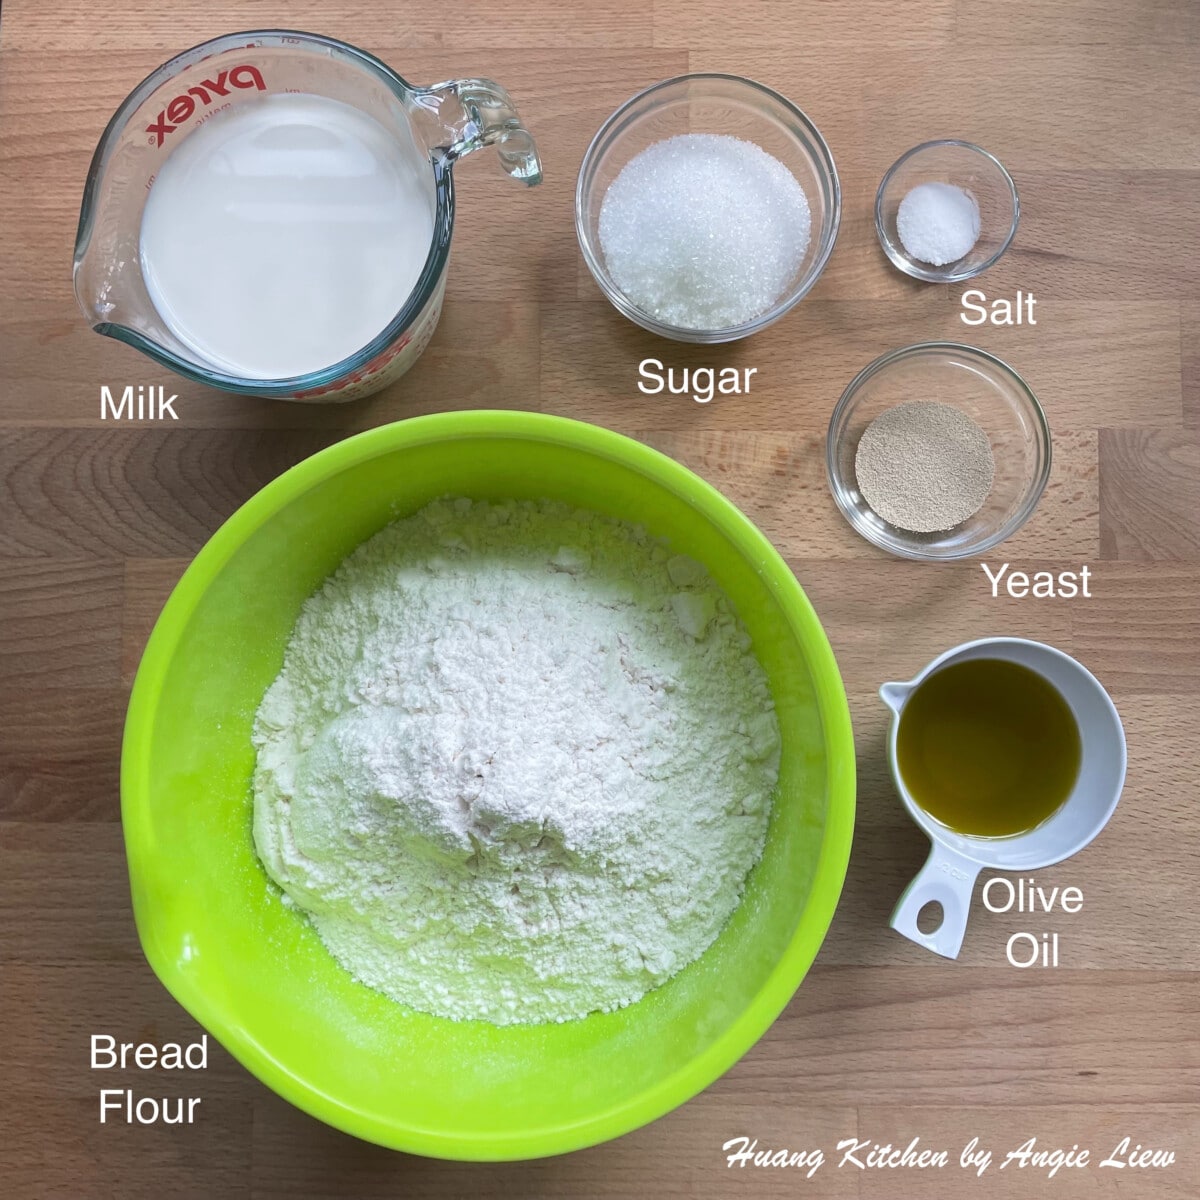 Basic White Bread Bread Machine Recipe by Huang Kitchen - prepare ingredients